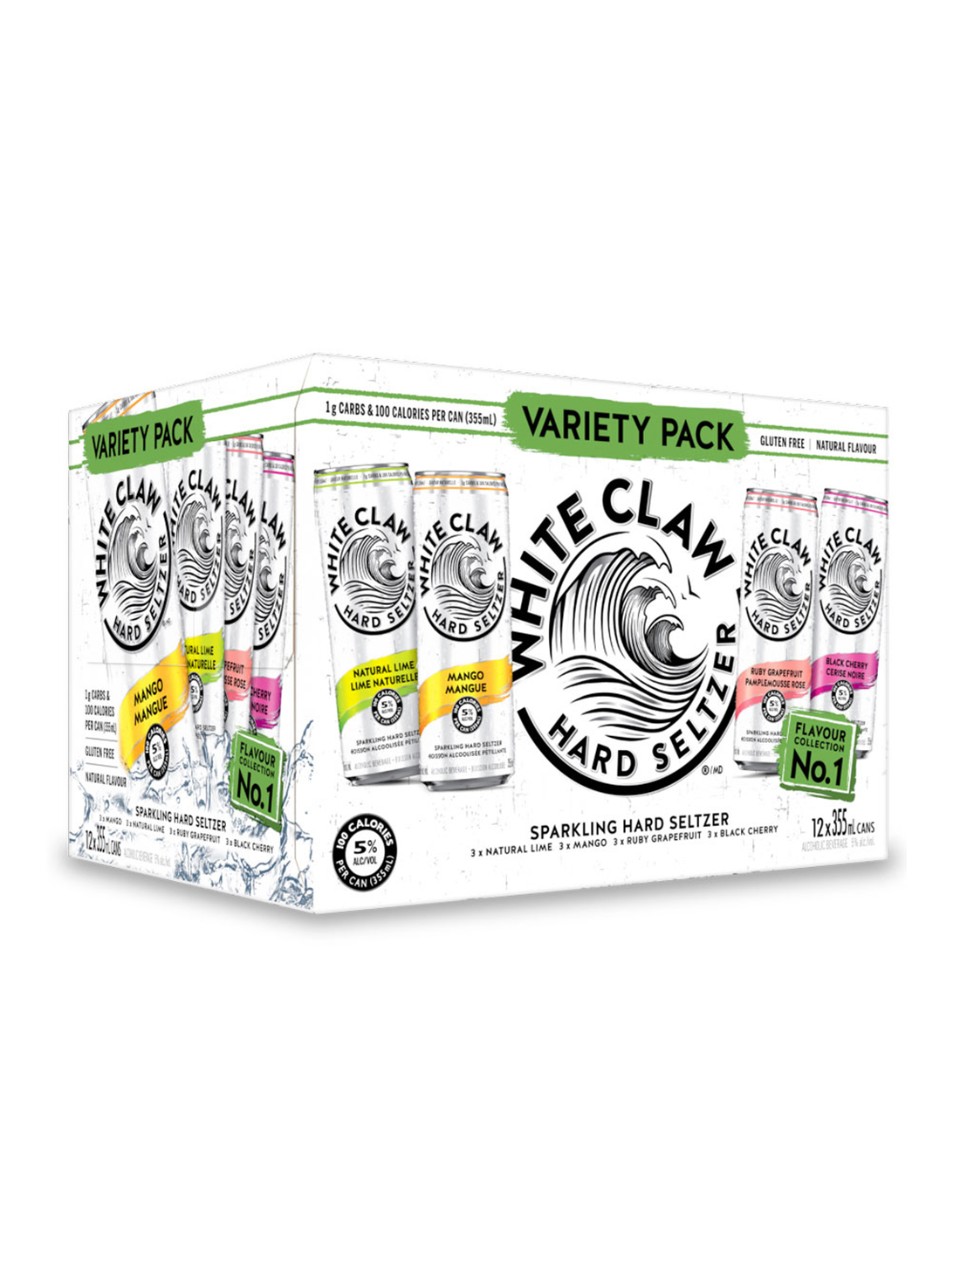 white-claw-variety-pack-1-lcbo